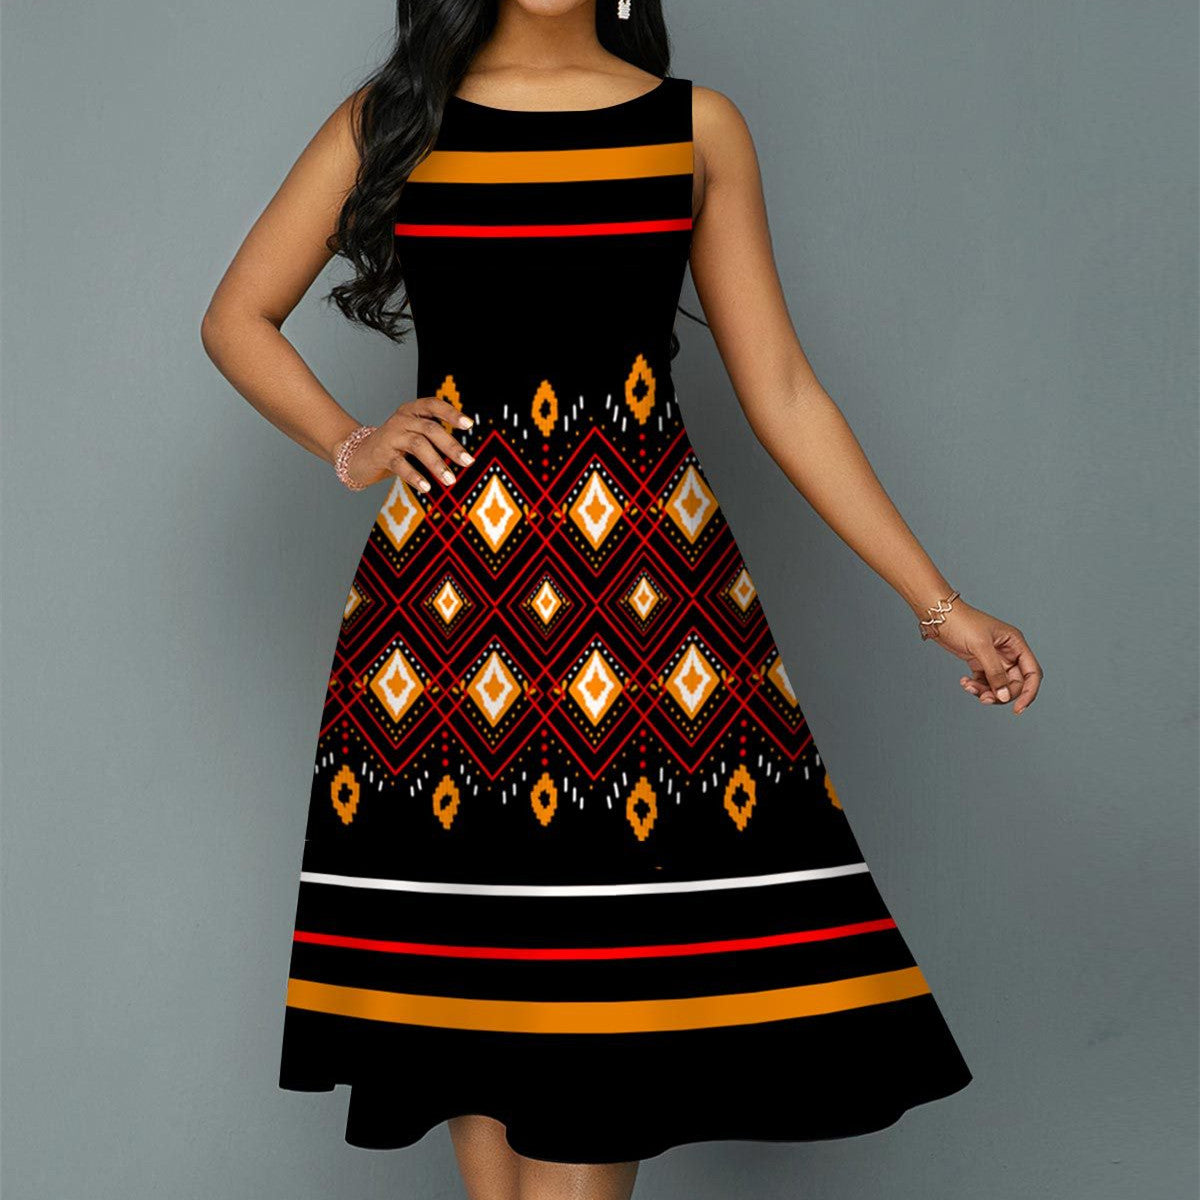 Women's Printed Striped Round Neck Knitted Dress